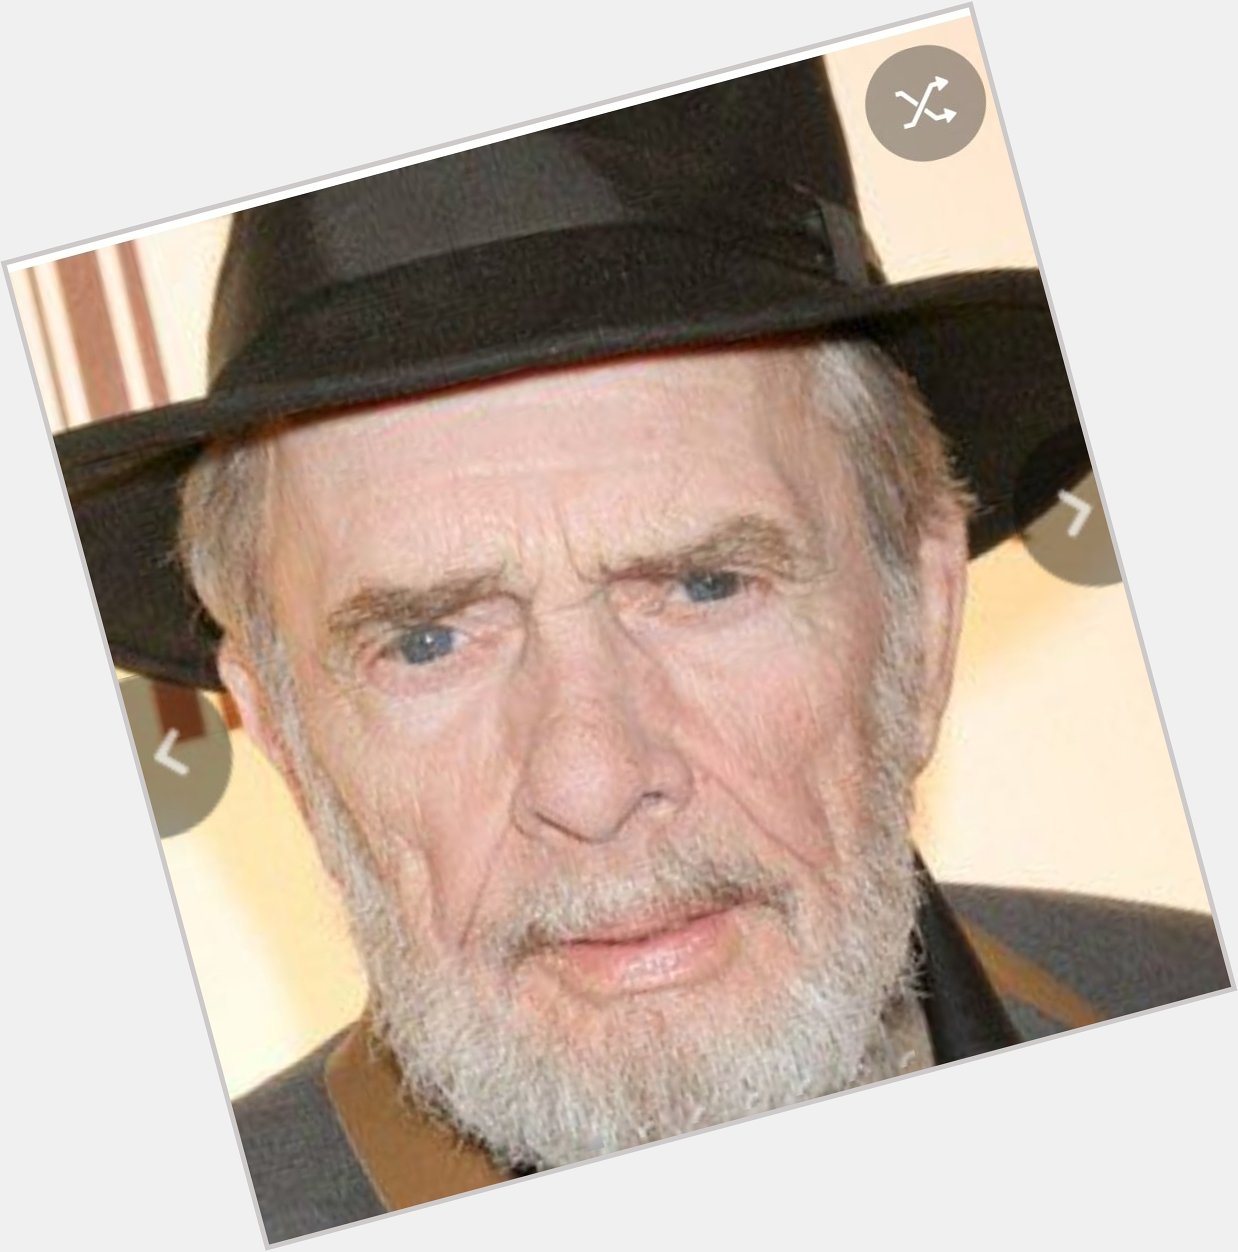 Happy Birthday to this wonderful singer.  Happy Birthday to Merle Haggard. Rest in Peace big man 